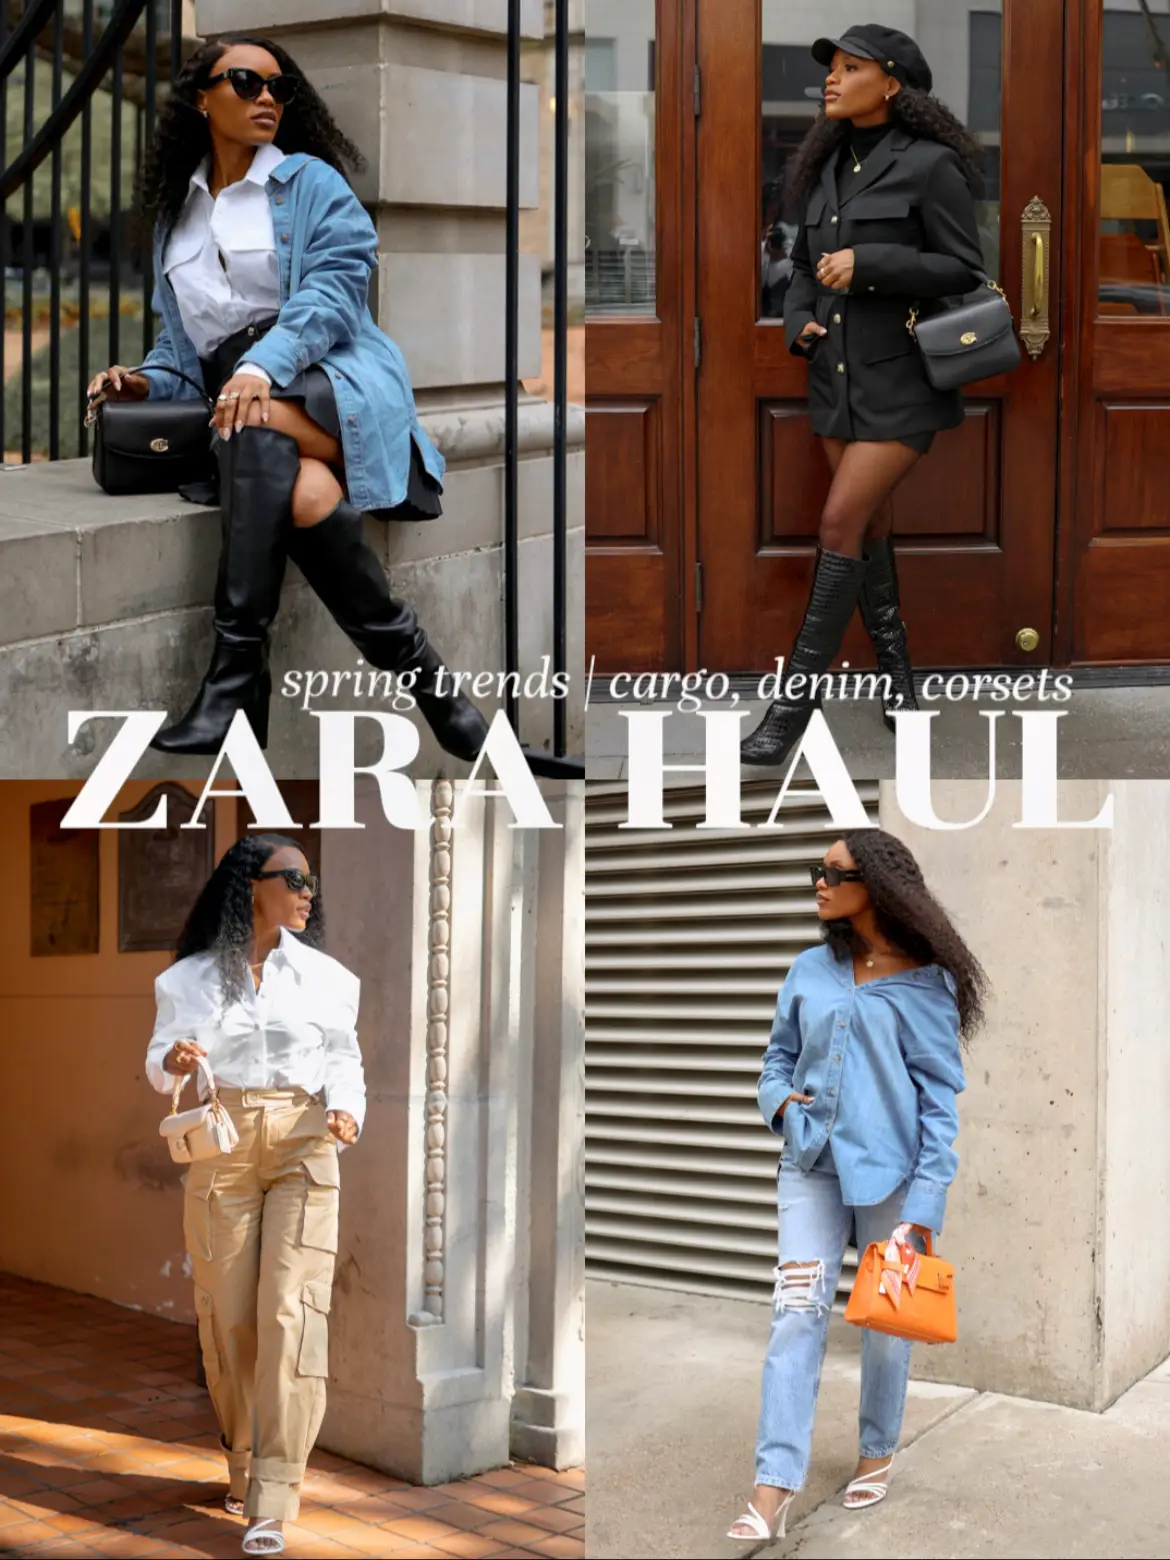 zara haul, spring trends, cargo, denim, corsets, Video published by  Syndie